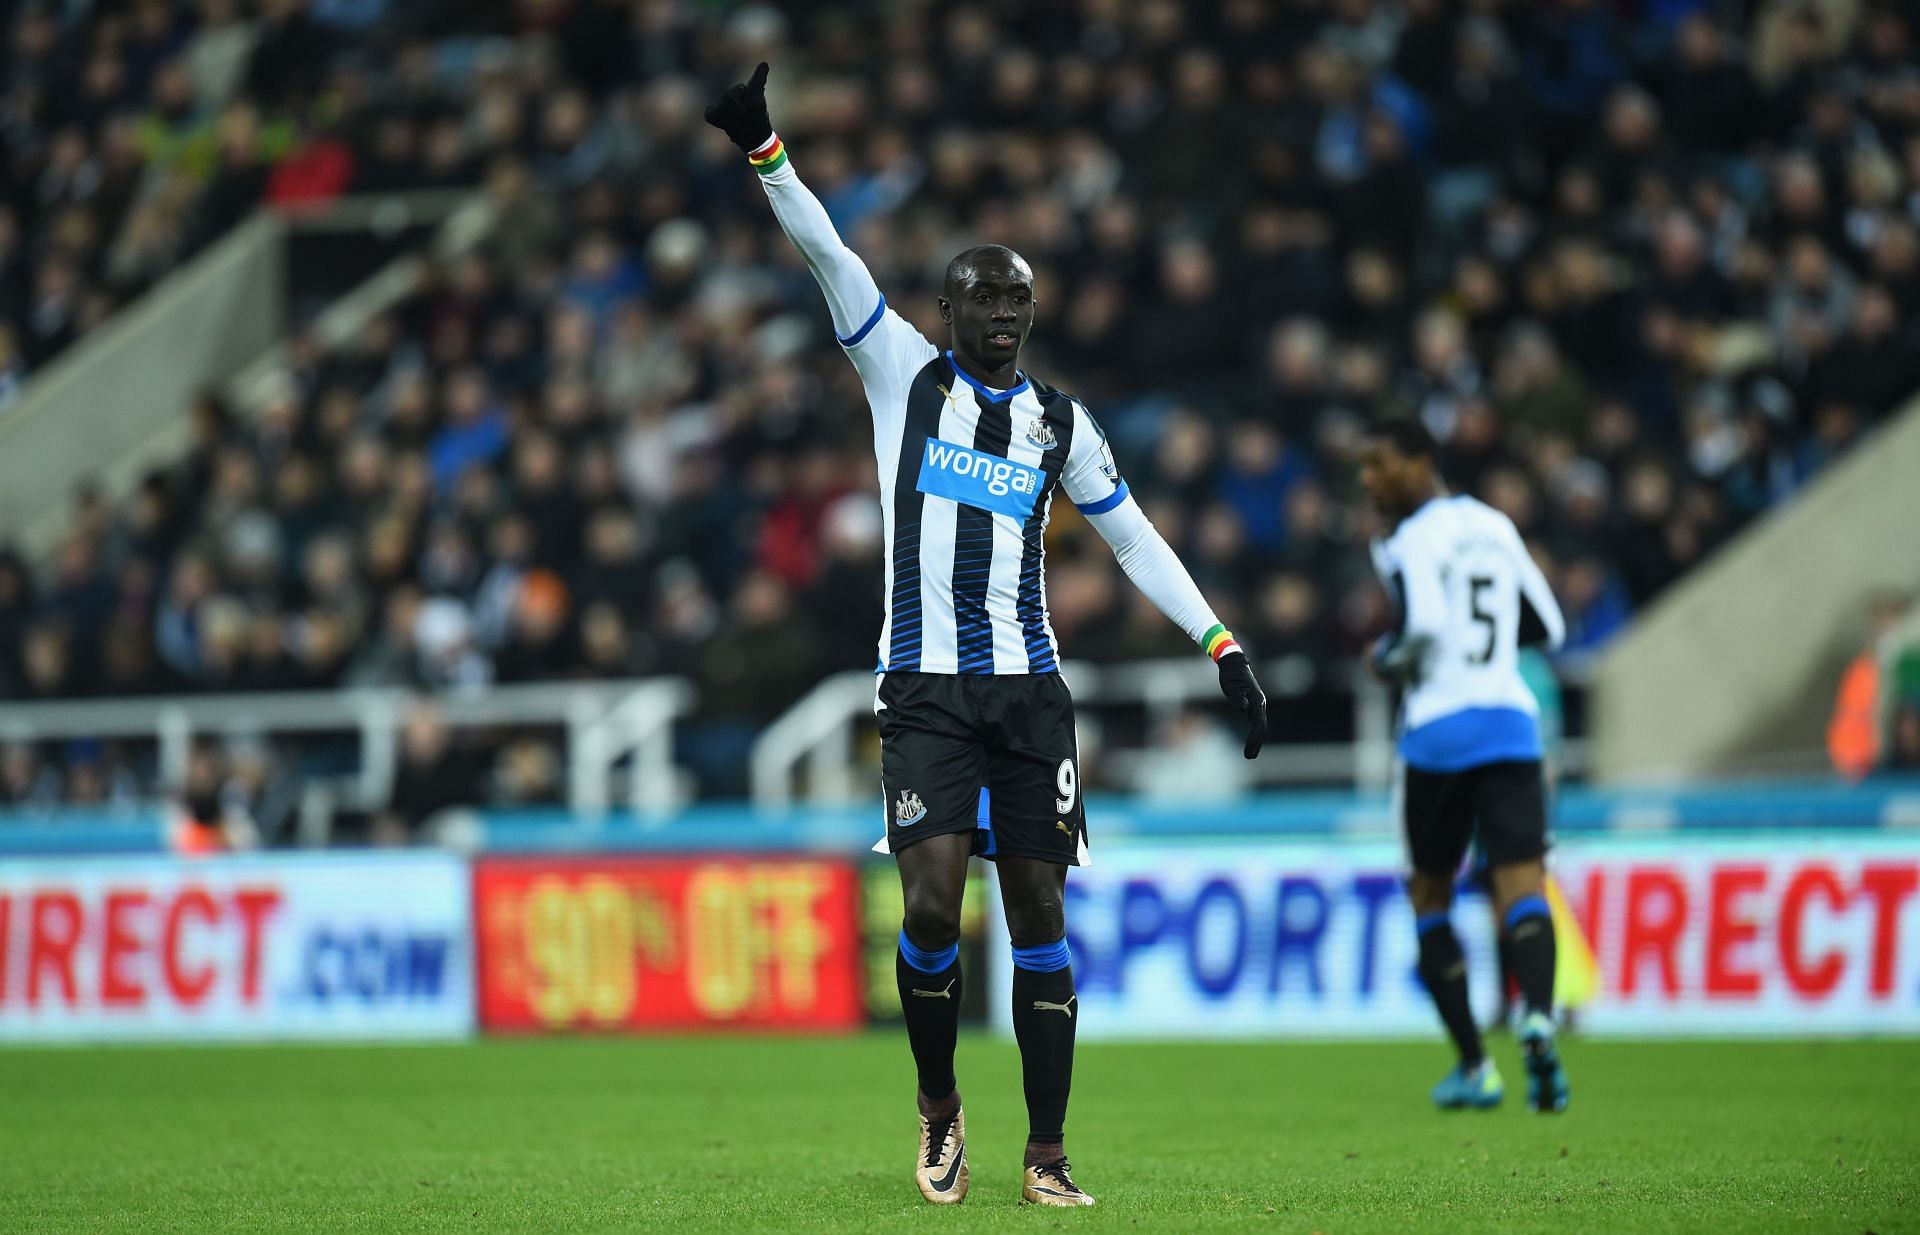 Newcastle player Papiss Cisse reacts during the Barclays Premier League match between Newcastle United and Liverpool at St James&#039; Park on December 6, 2015 in Newcastle, England.